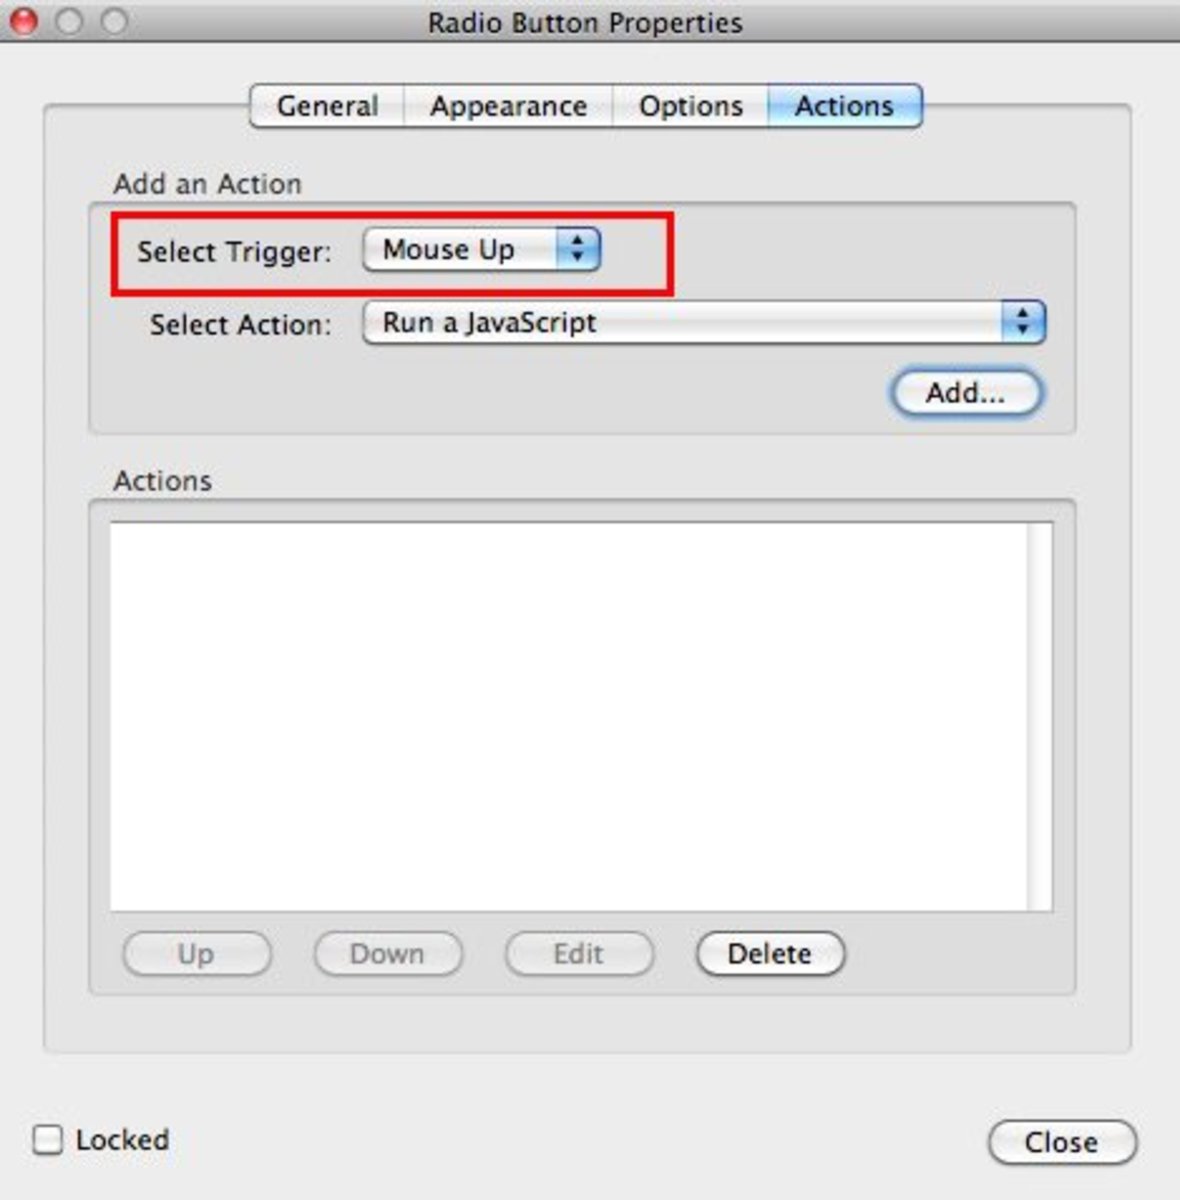 Select Trigger "Mouse Up"